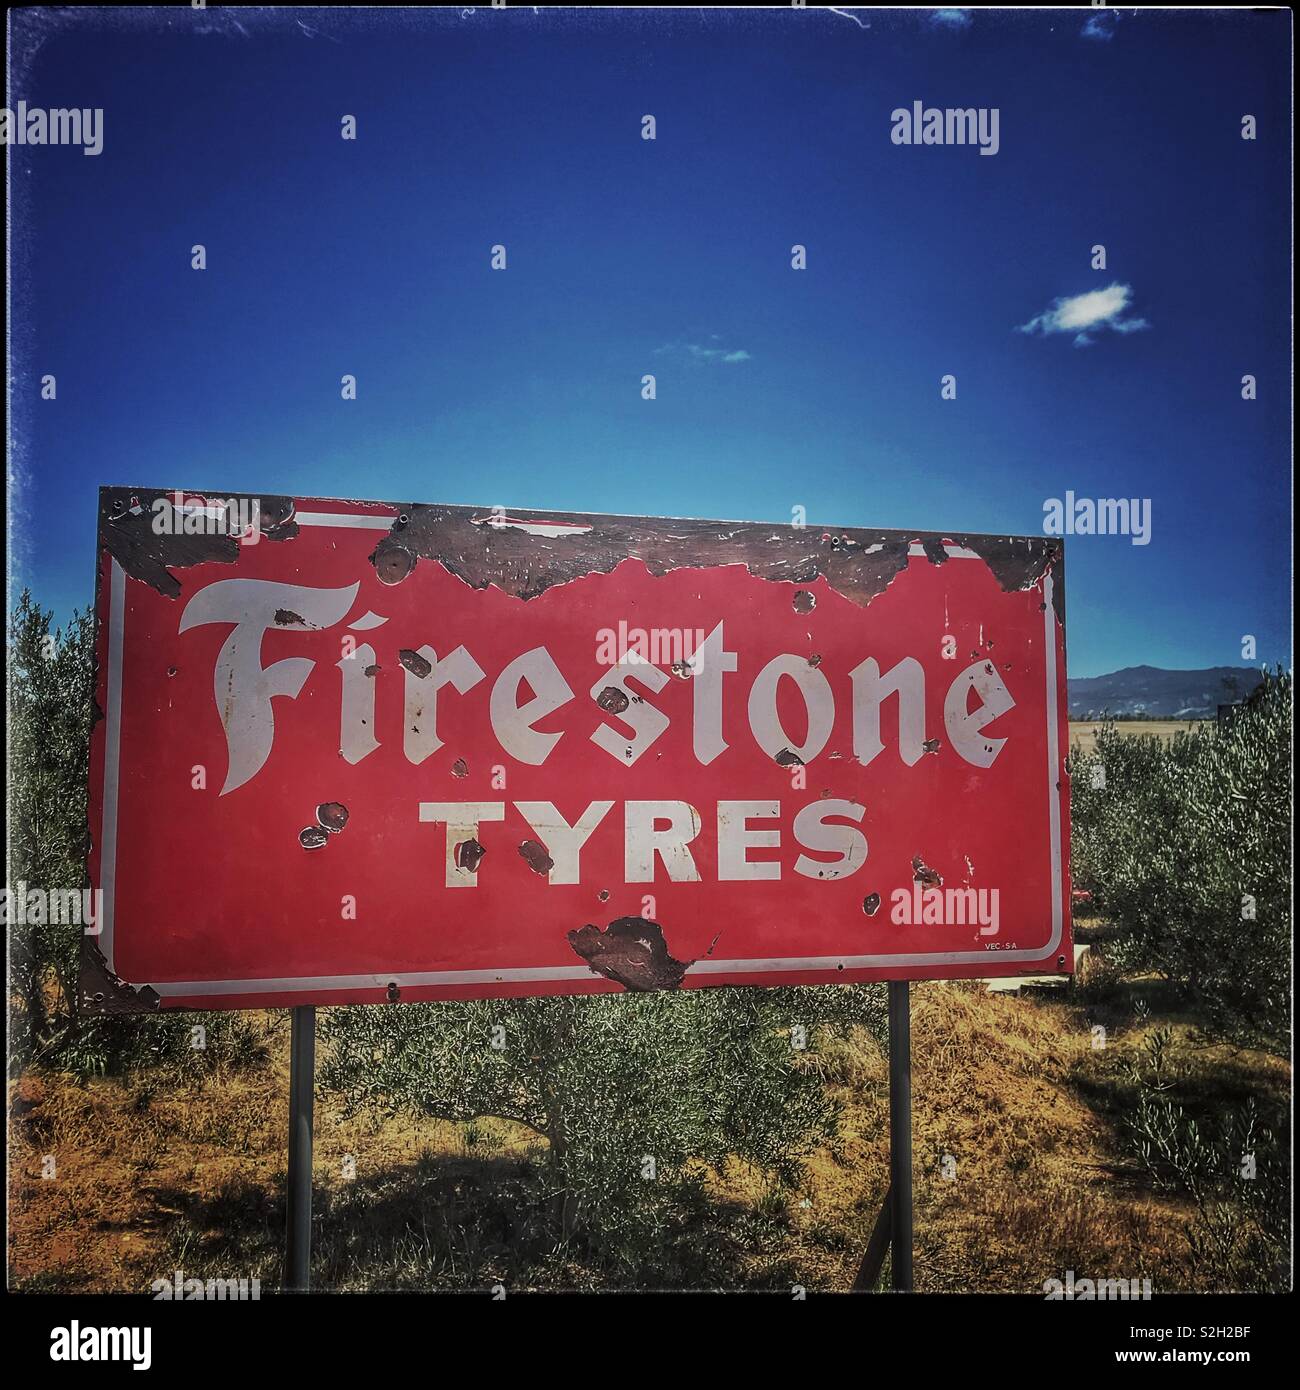 Firestone Tyres ad at Toeka Stoor, Paarl, South Africa. Stock Photo